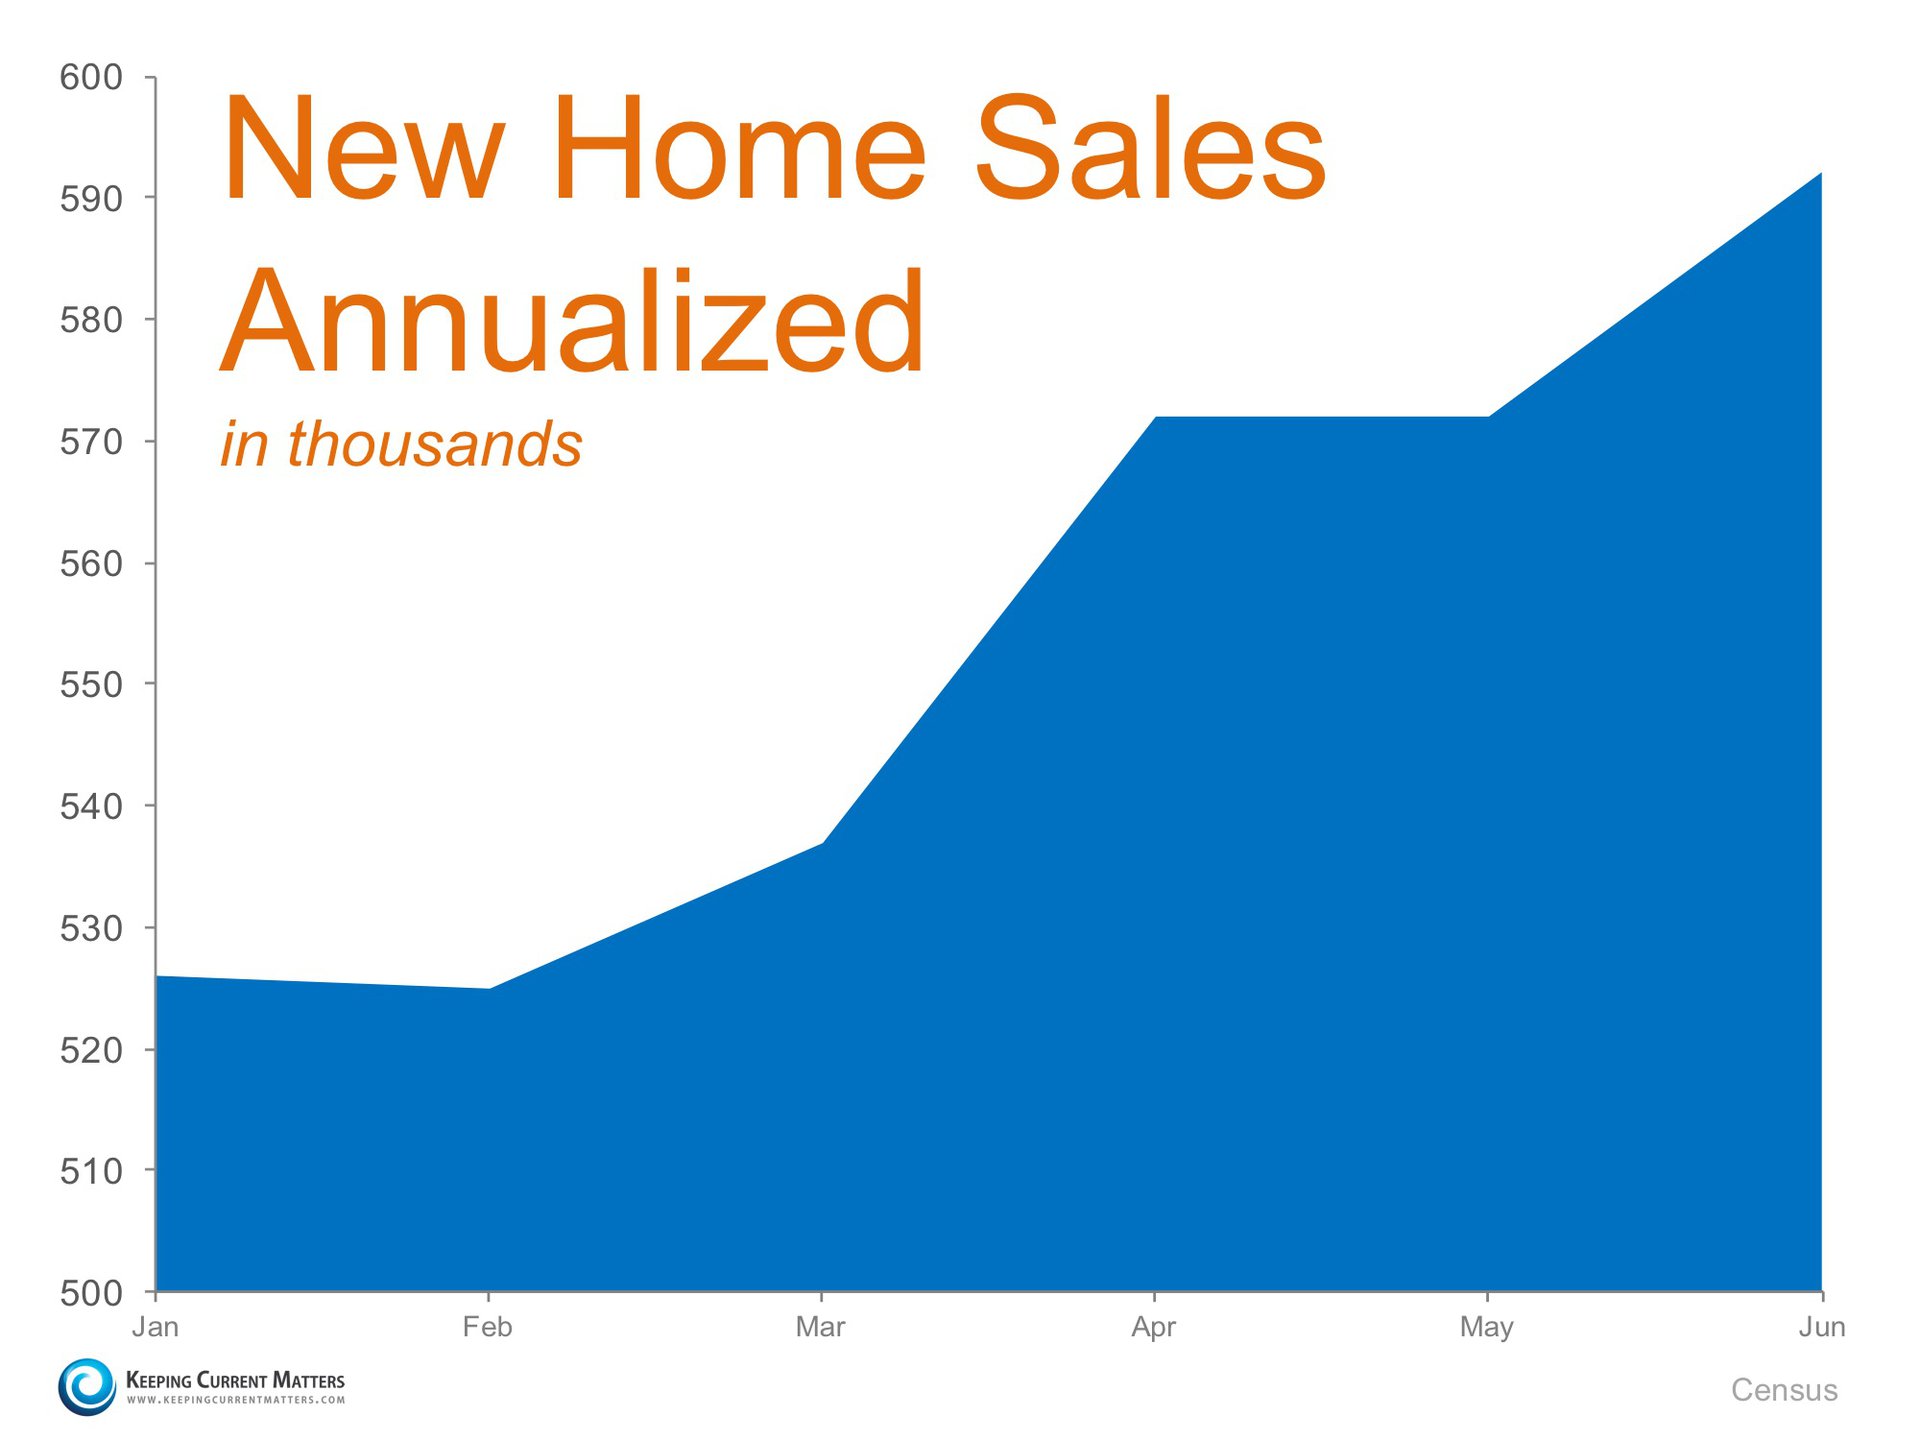 New Home Sales Up 25.4% Last Month! | Keeping Current Matters